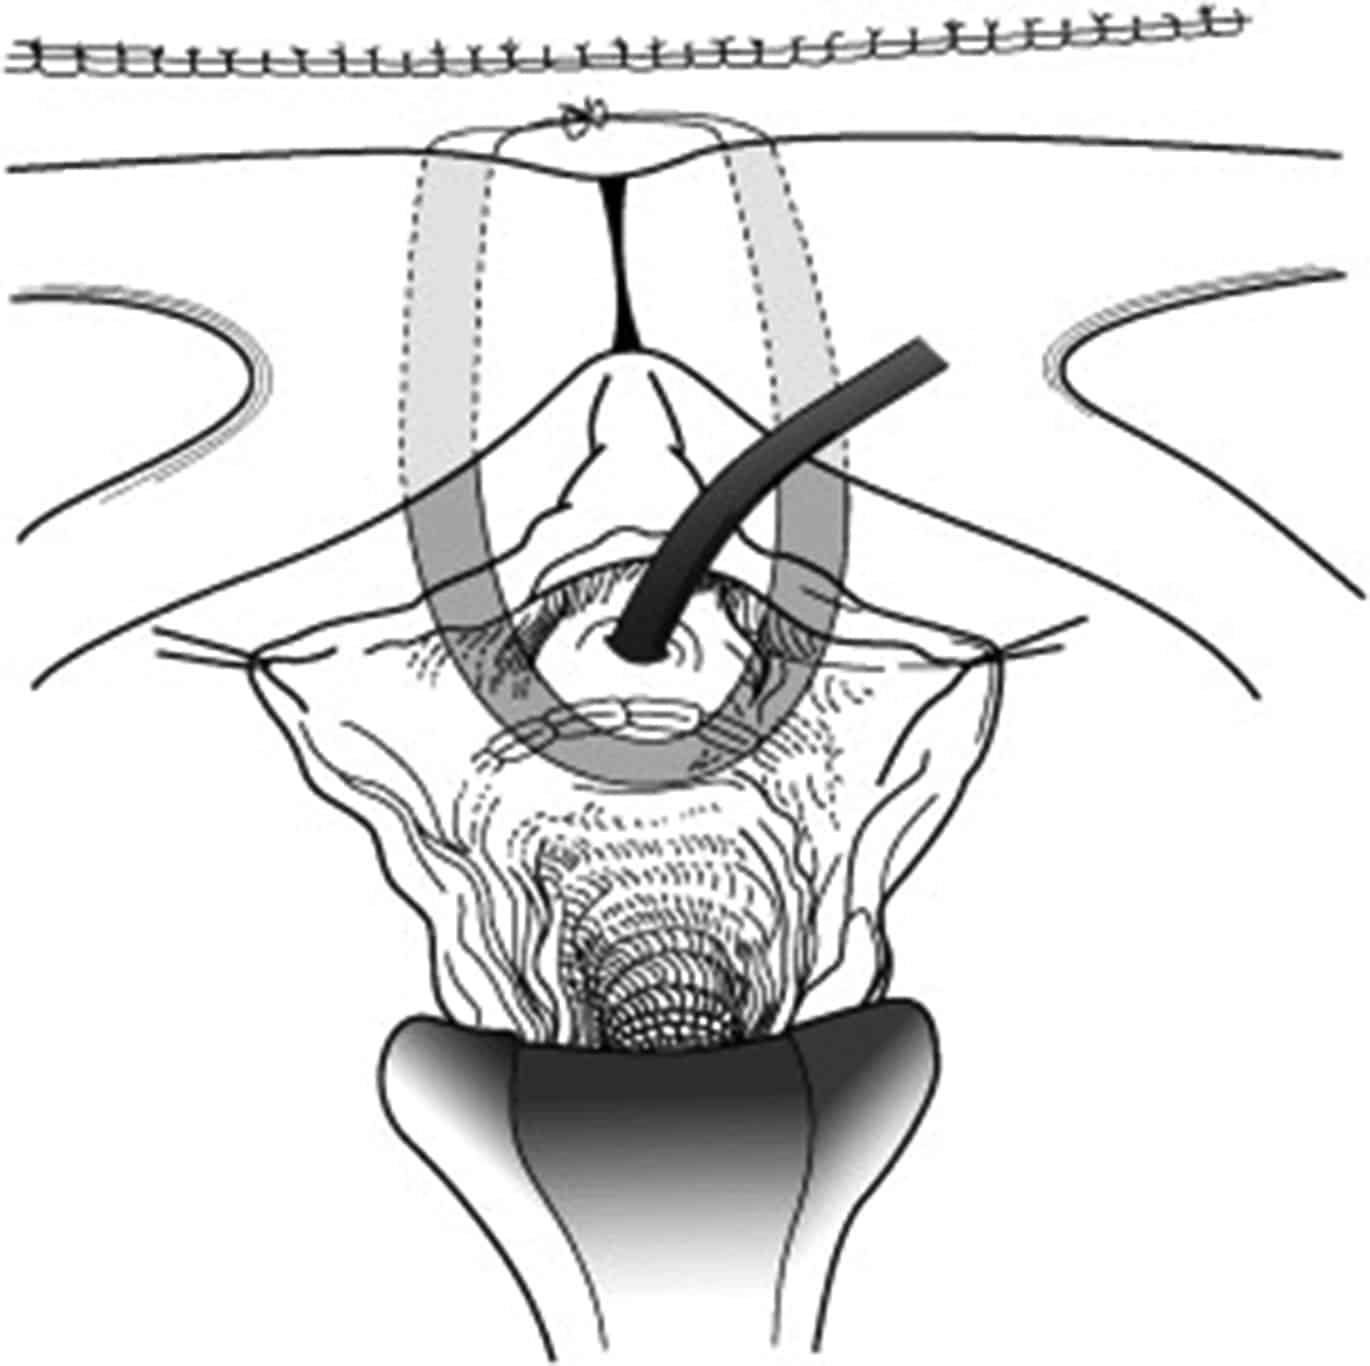 Surgery for Stress Urinary Incontinence